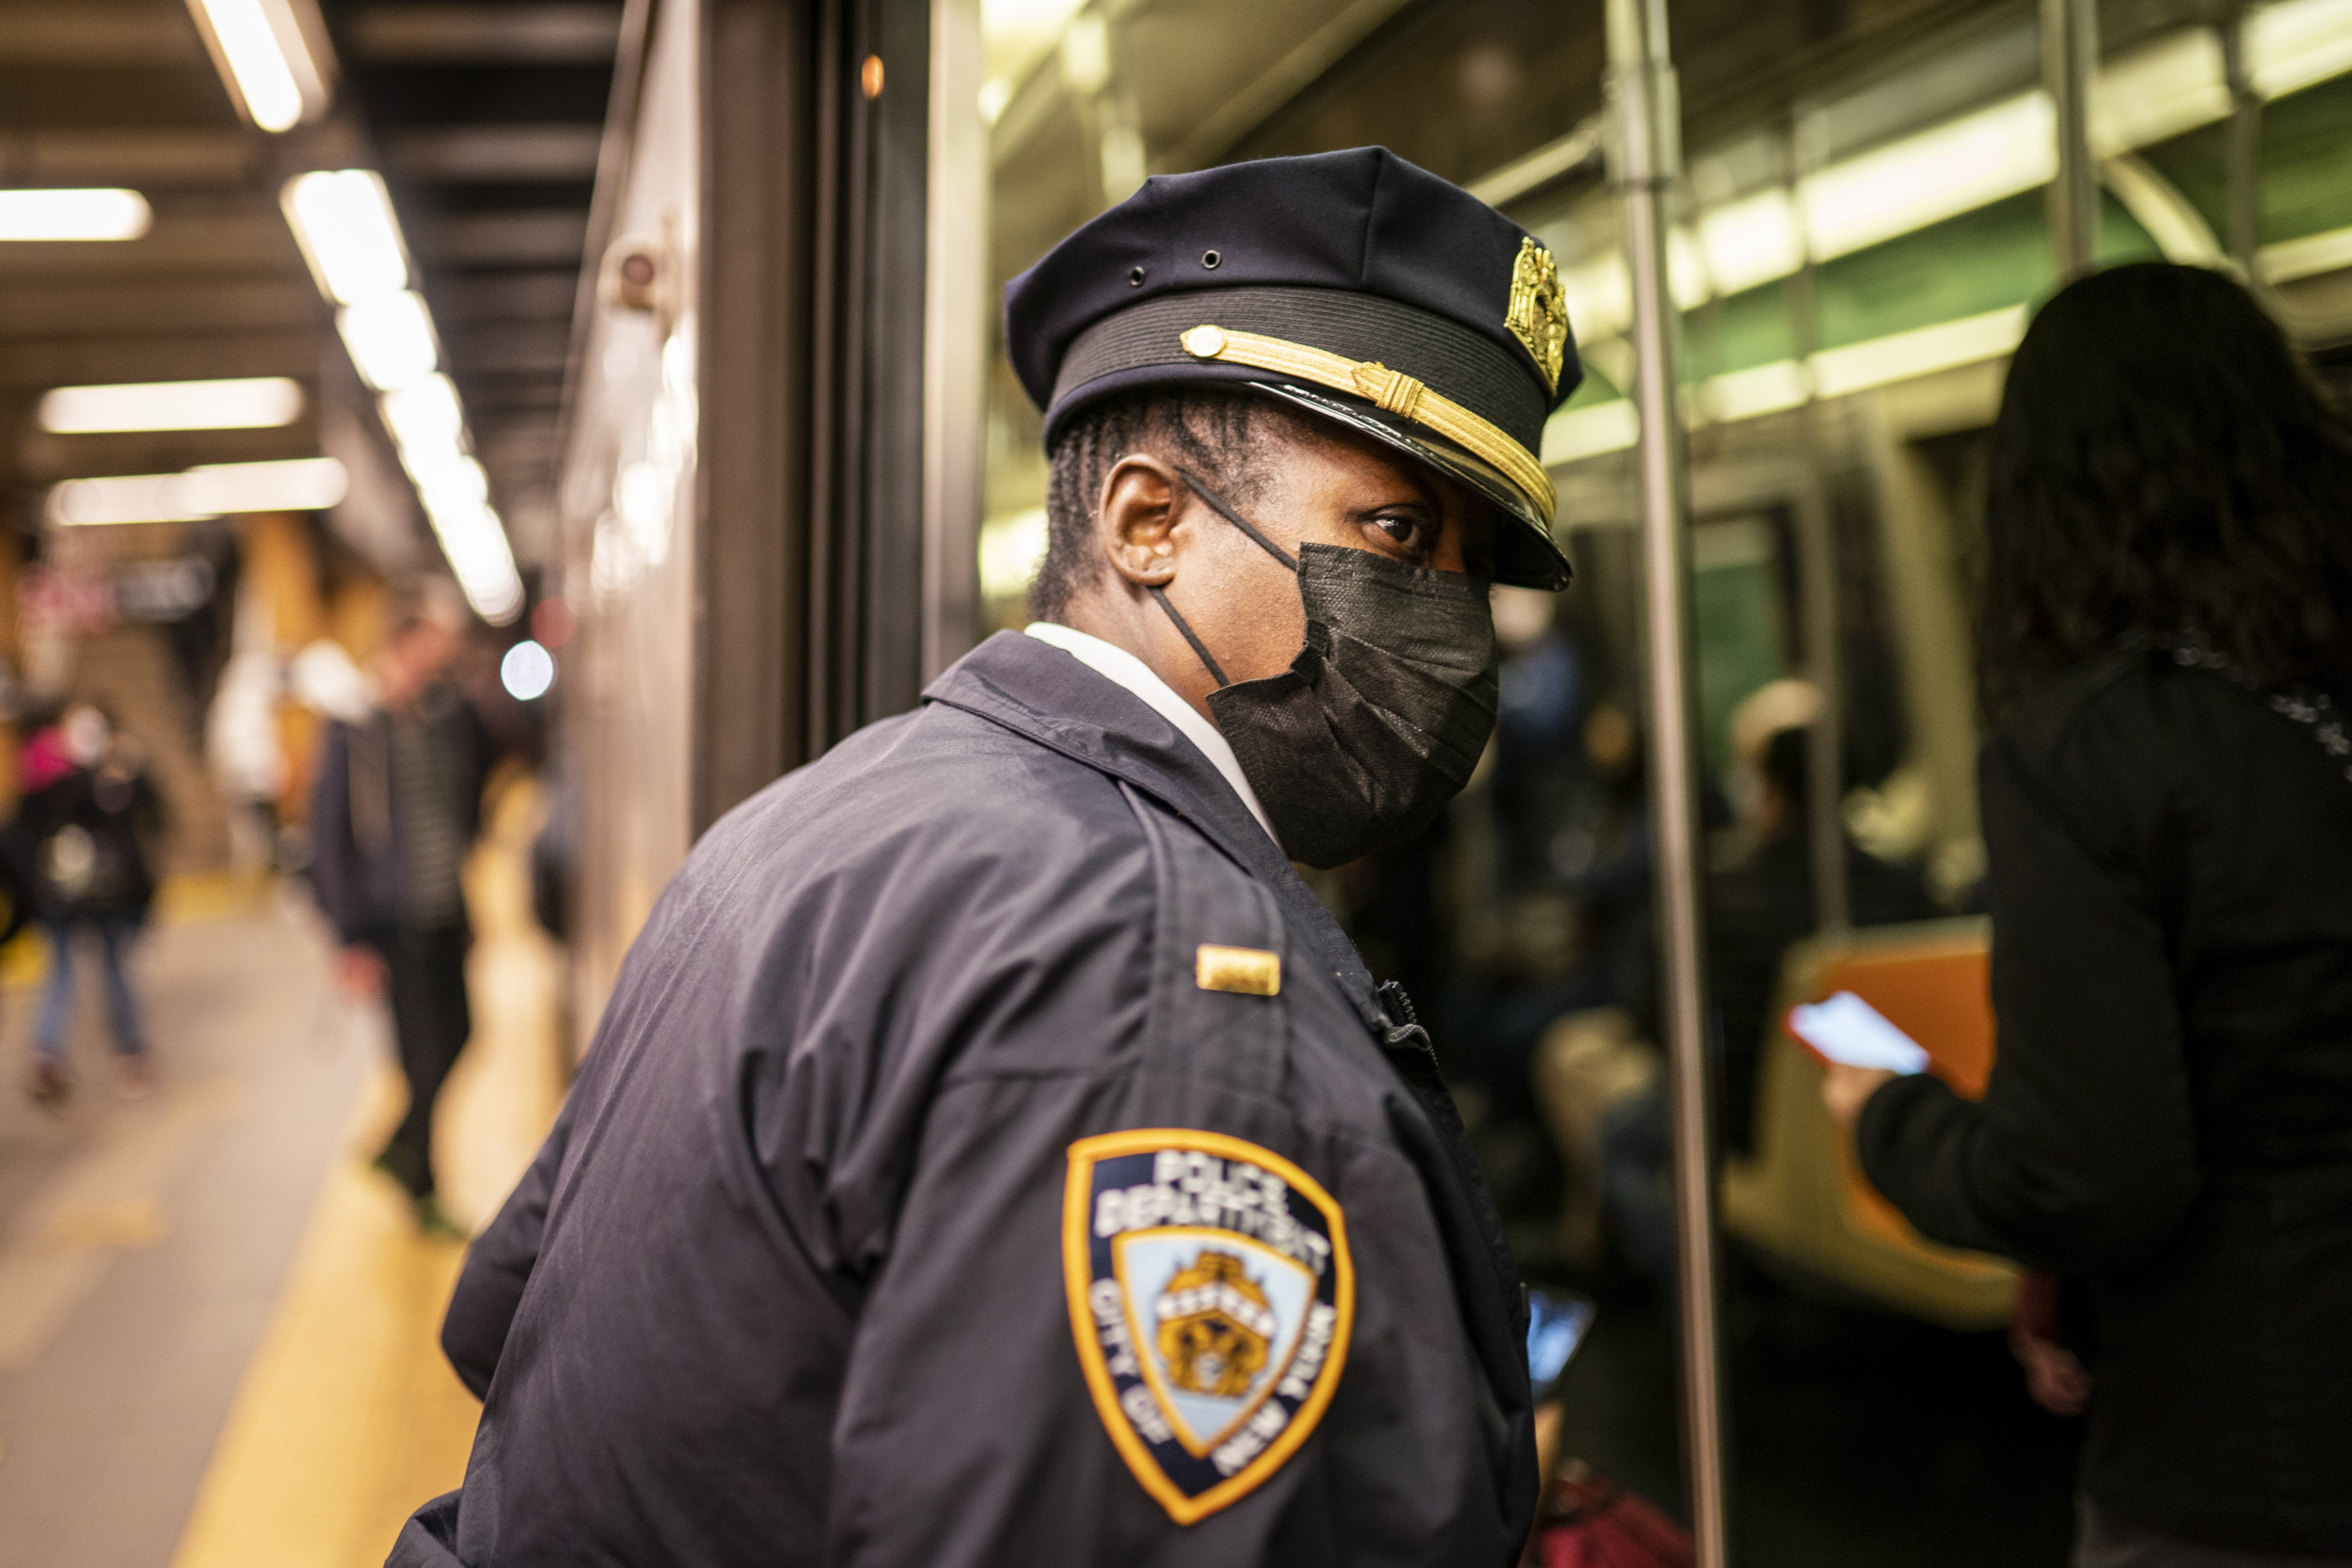 Citizens Blast Nypd For Harassing Residents In Wake Of Subway Shooting